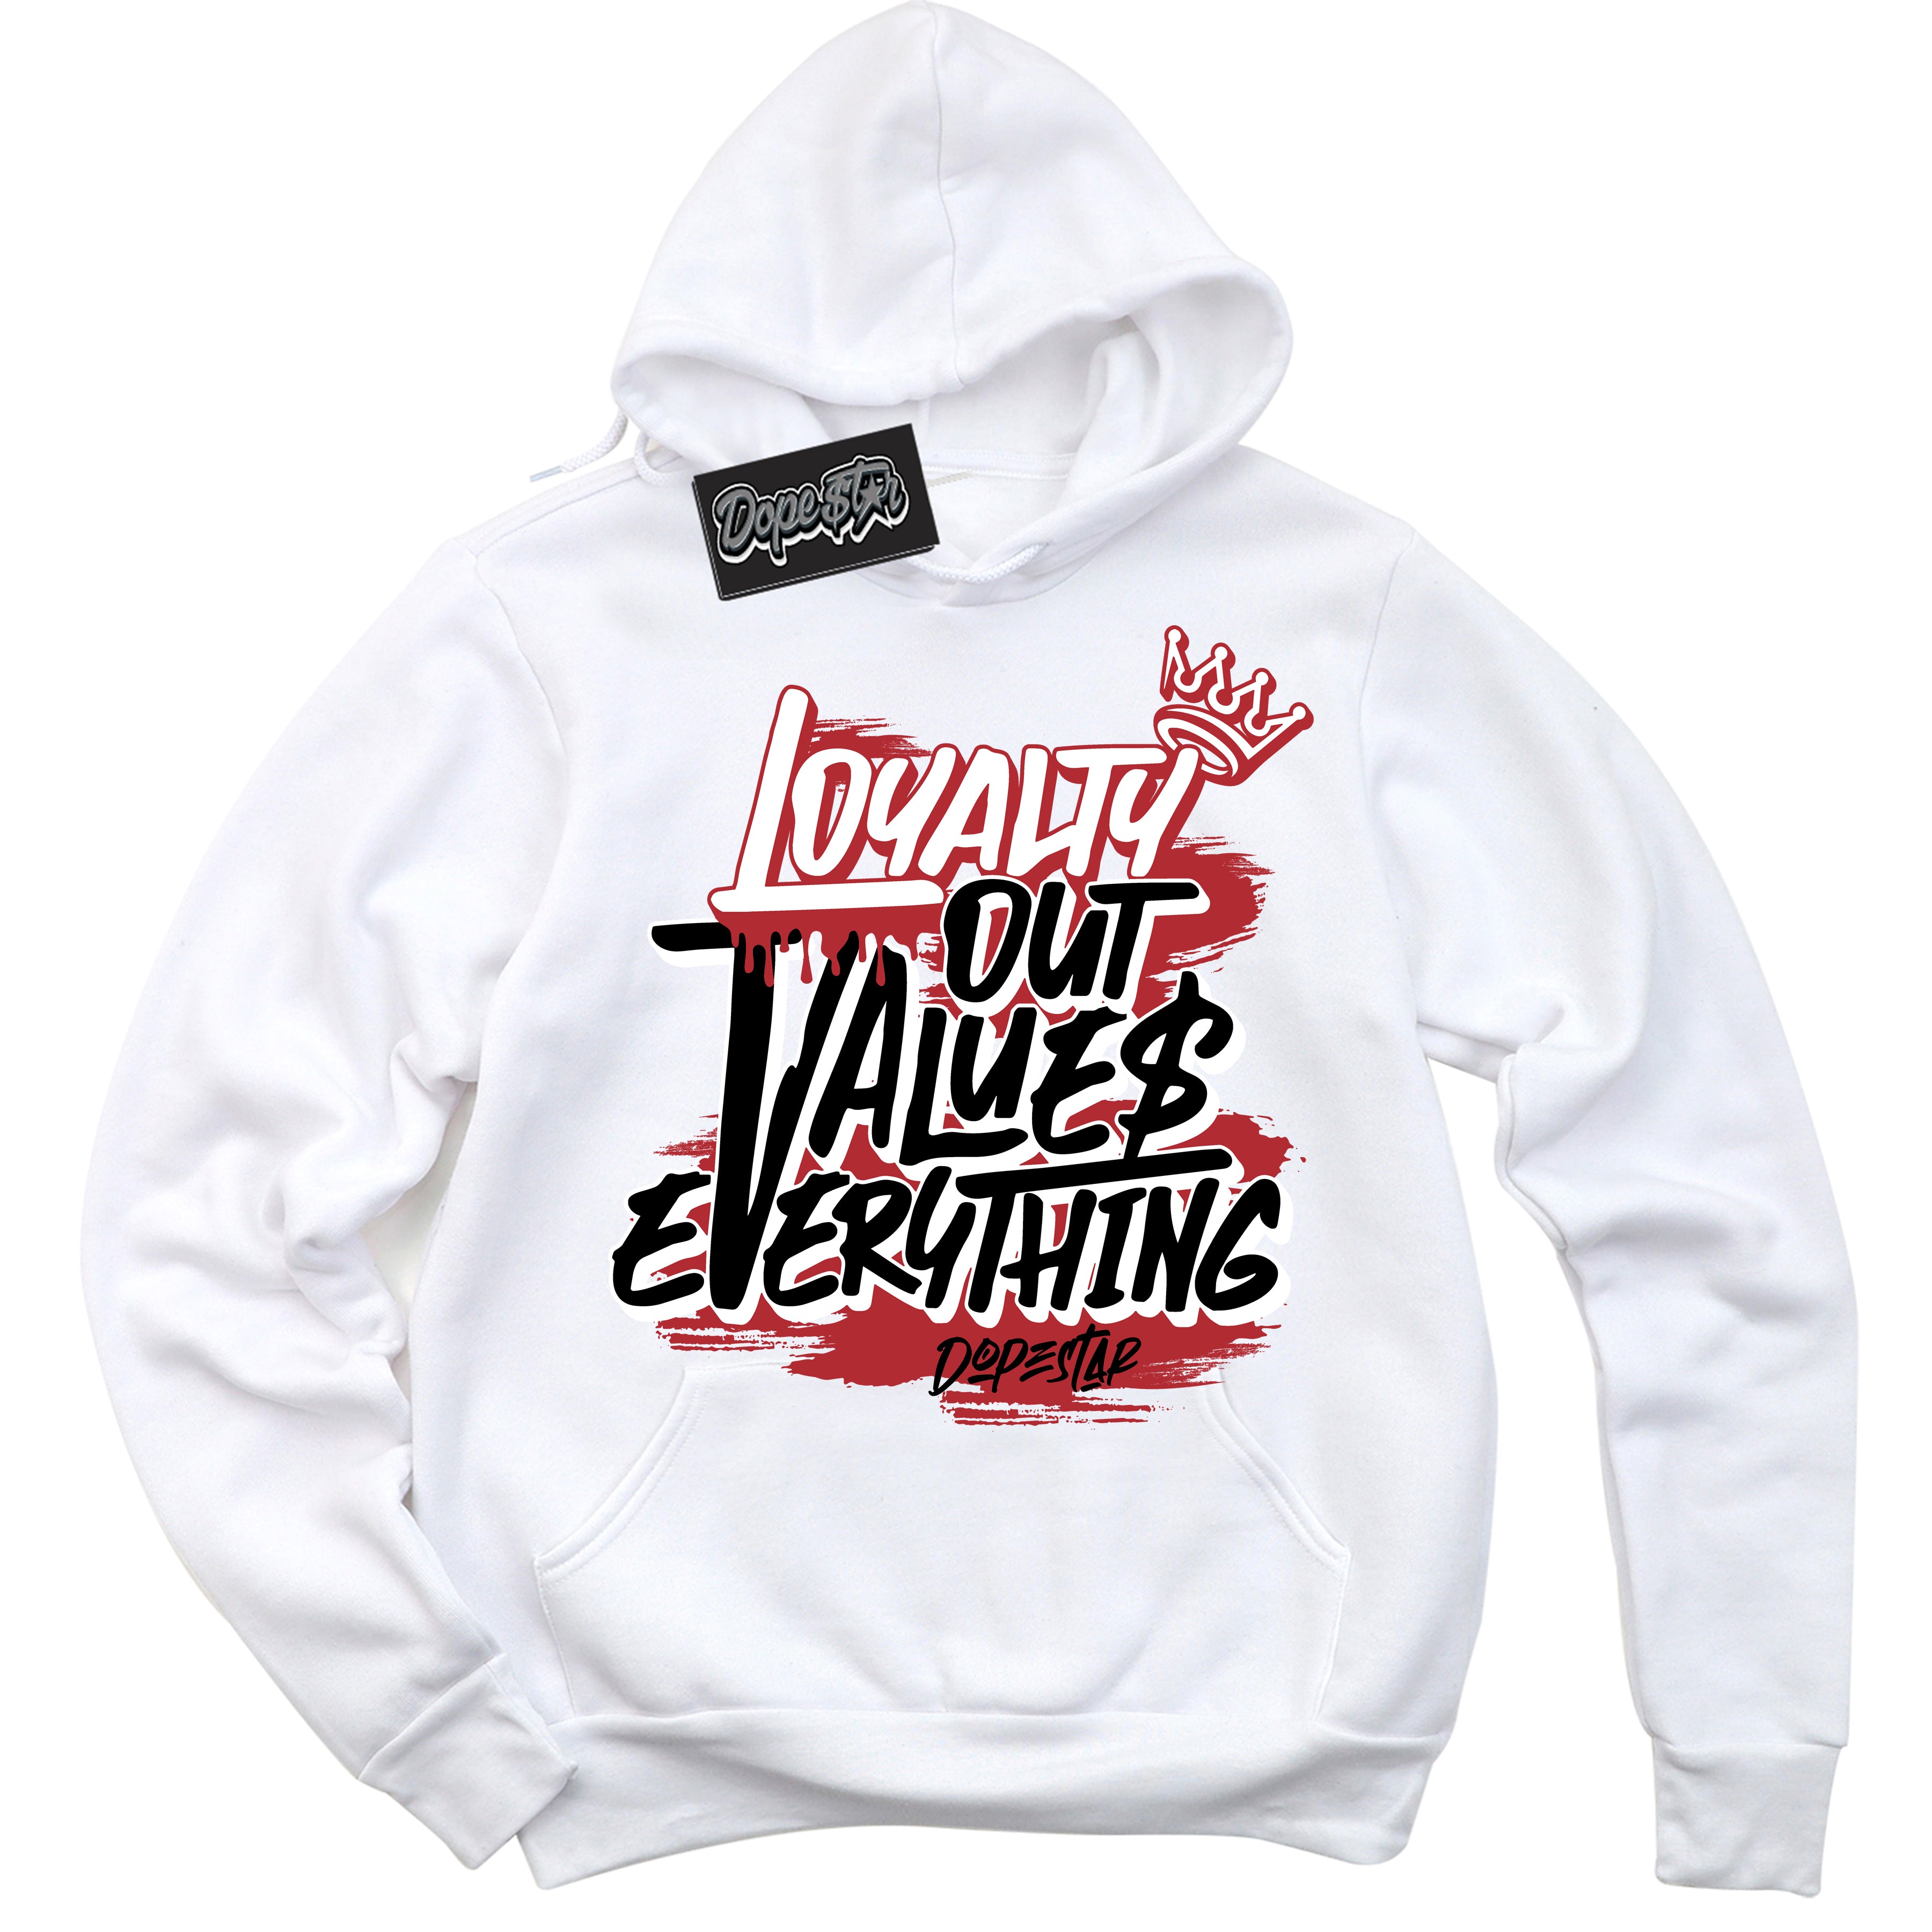 Cool White Hoodie with “ Loyalty Out Values Everything ”  design that Perfectly Matches Lost And Found 1s Sneakers.